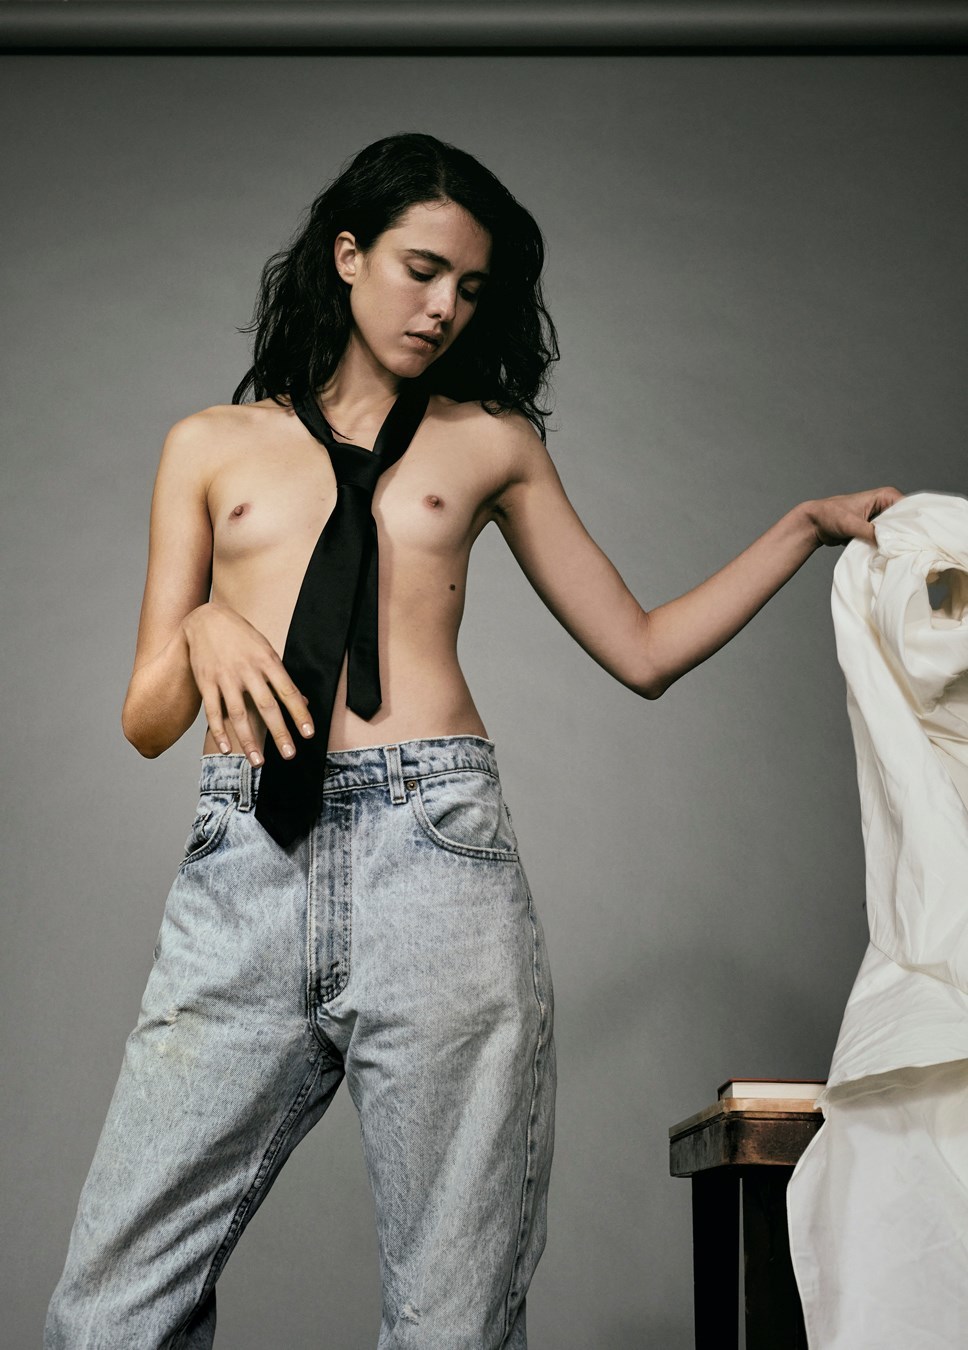 Shameless Seductress Margaret Qualley Goes Topless in a Hot Photoshoot